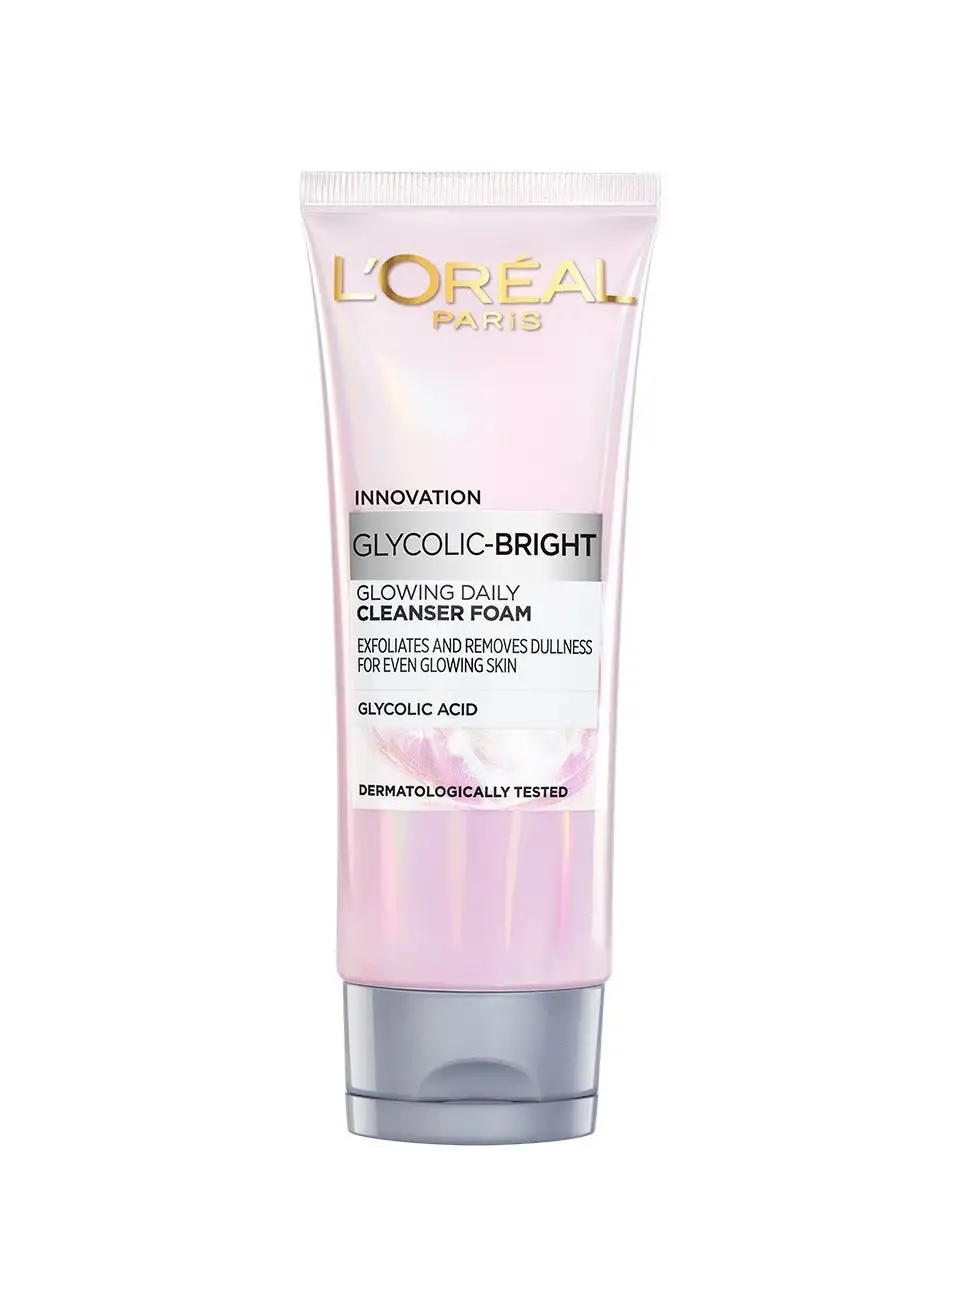 L'OREAL PARIS Glycolic Bright Glowing Daily Cleanser Foam - 100ML